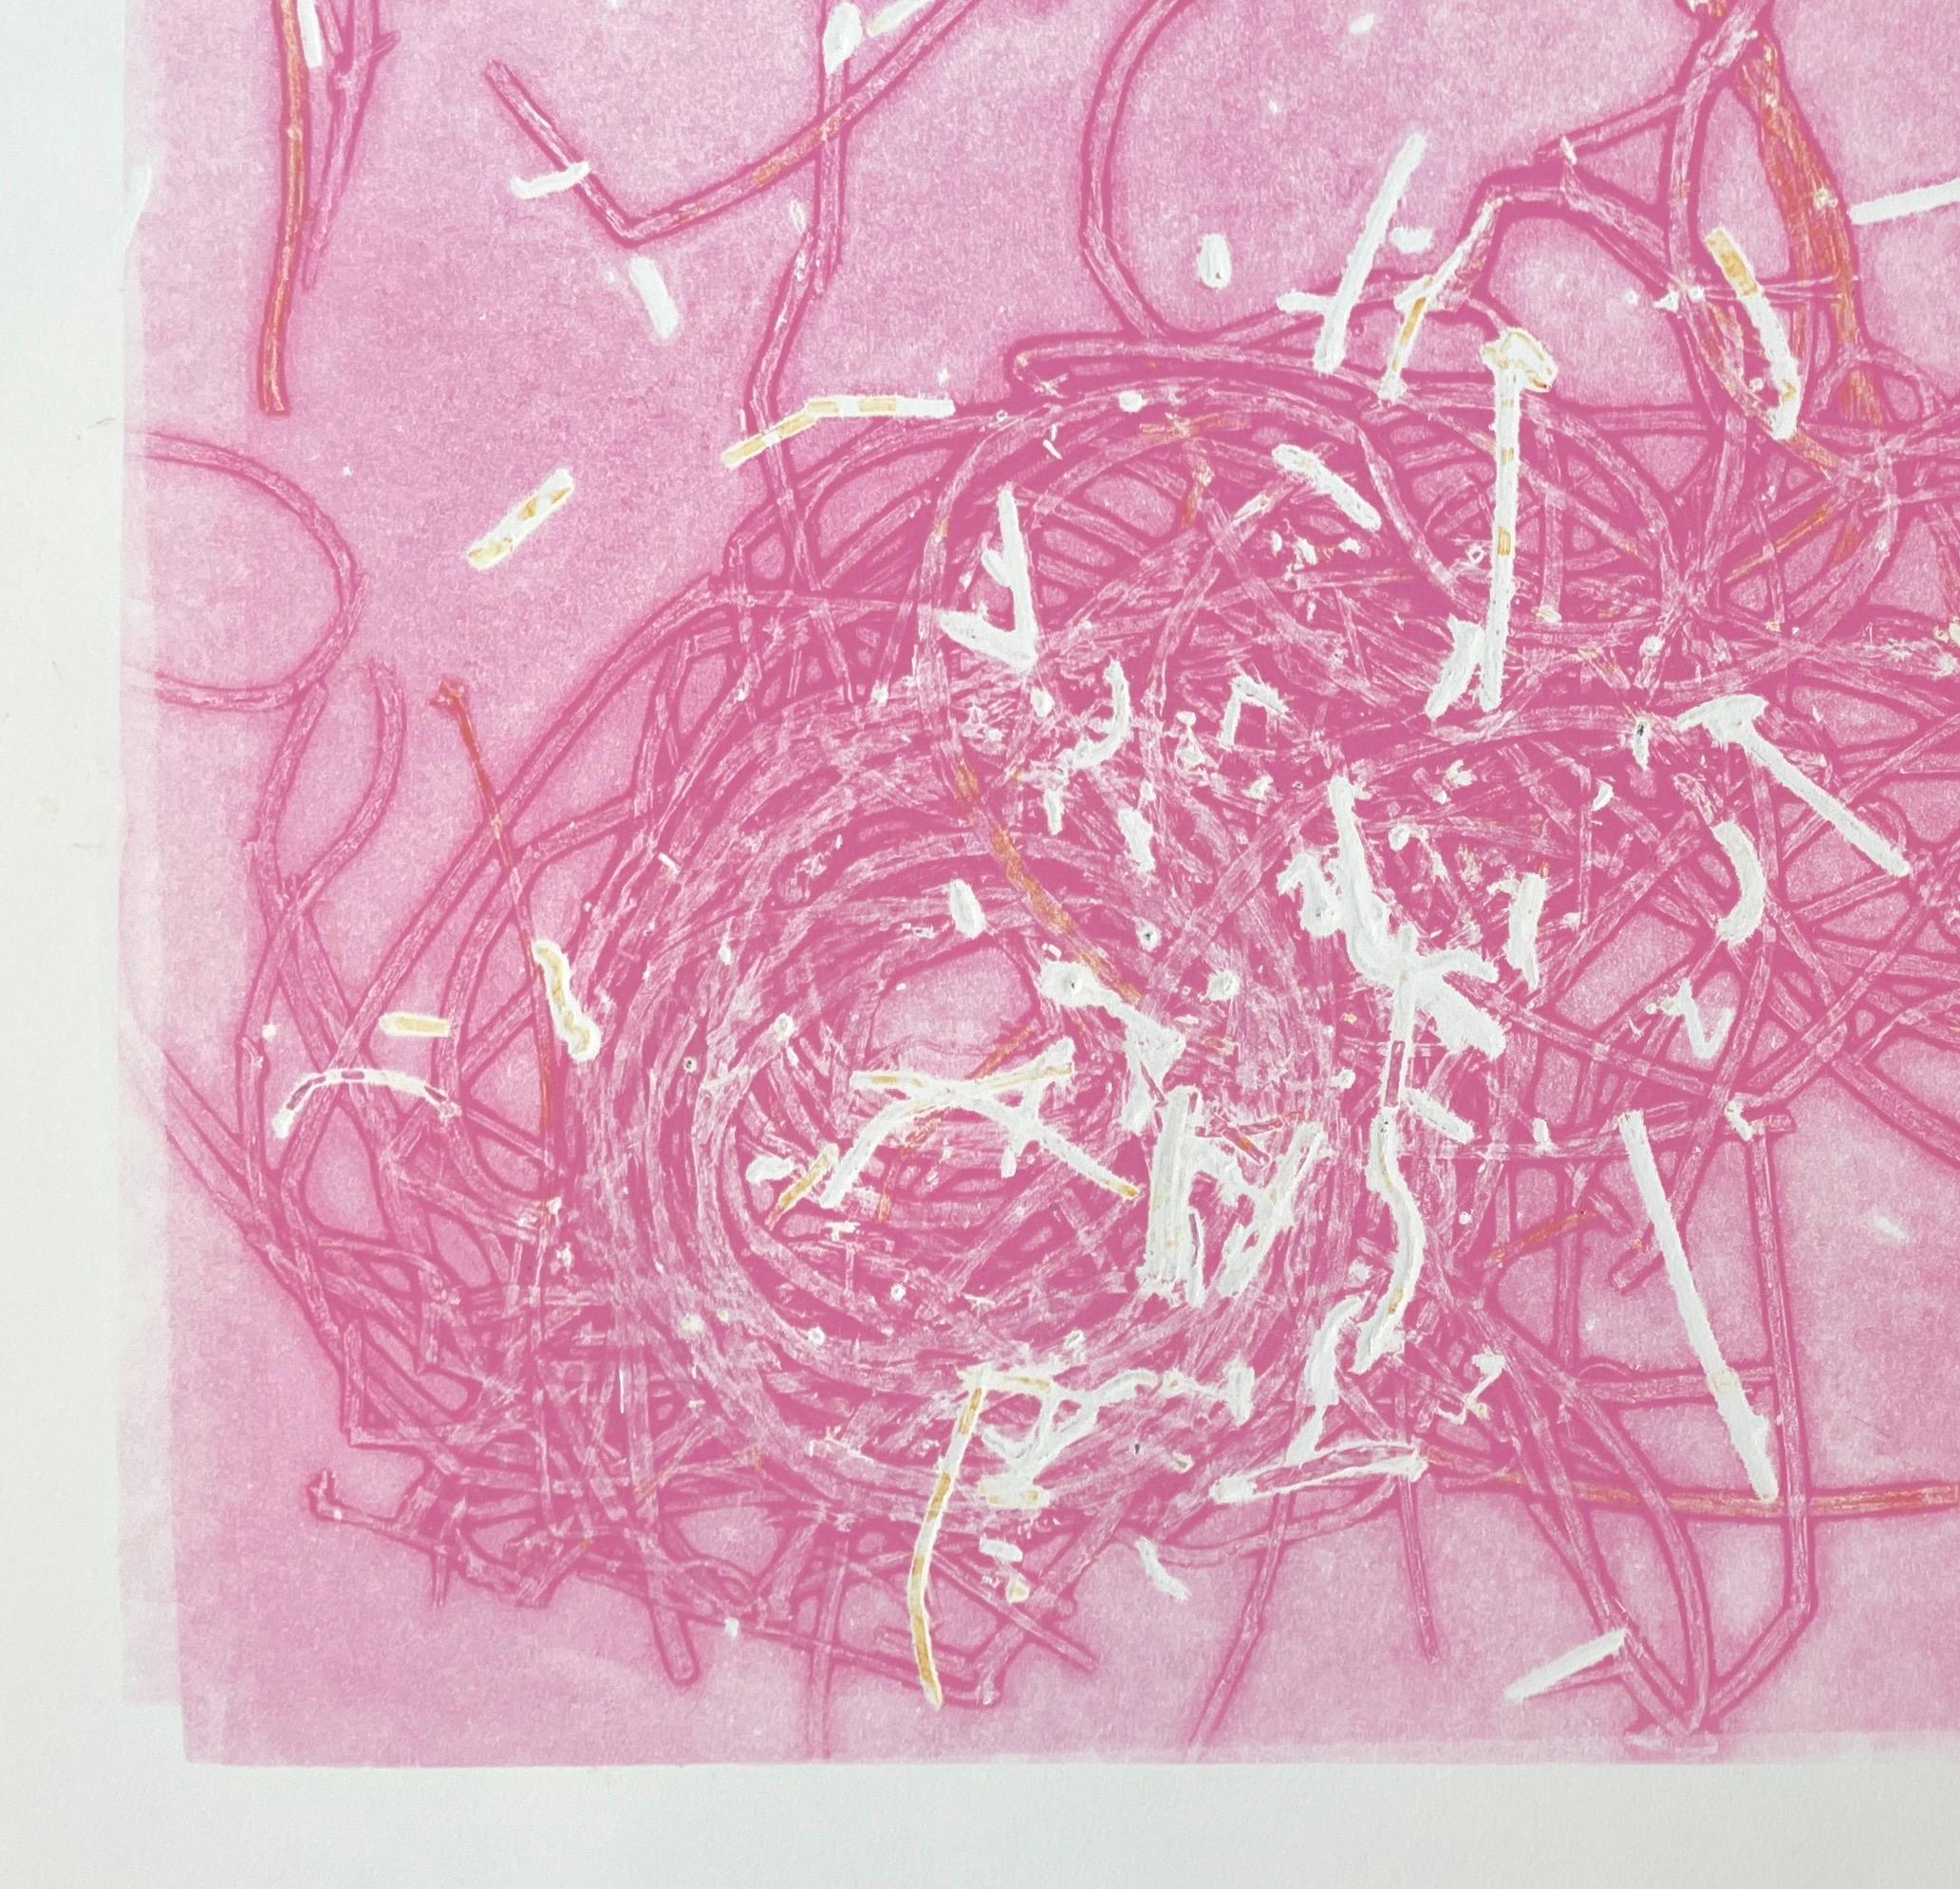 Pink Nest: one-of-a-kind monoprint of abstract bird nest w/ orange & white lines - Painting by Deirdre Murphy